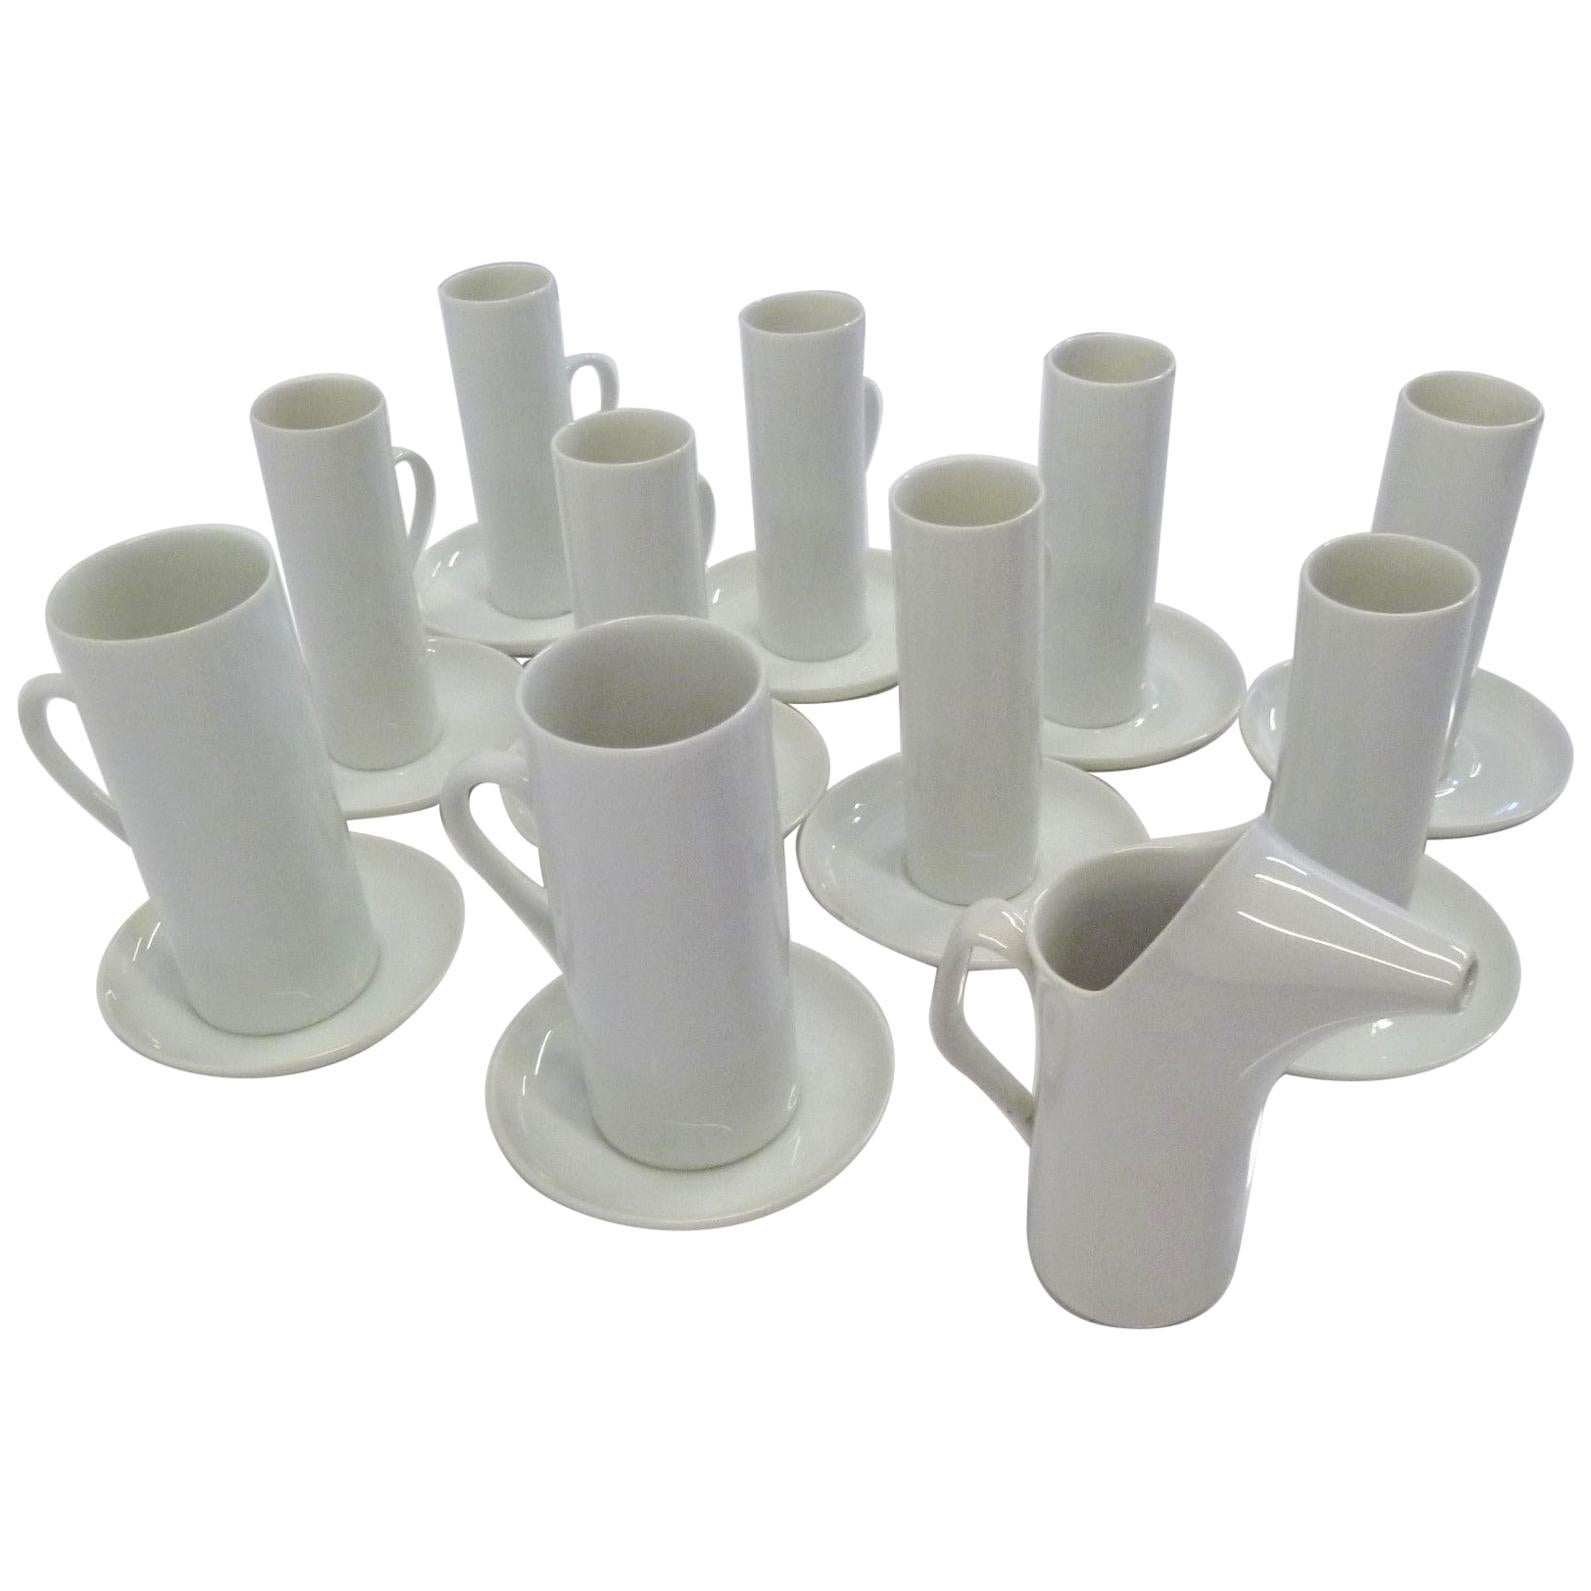 LaGardo Tackett 'Tack' Modern Grouping of White Cups and Saucers Plus Creamer